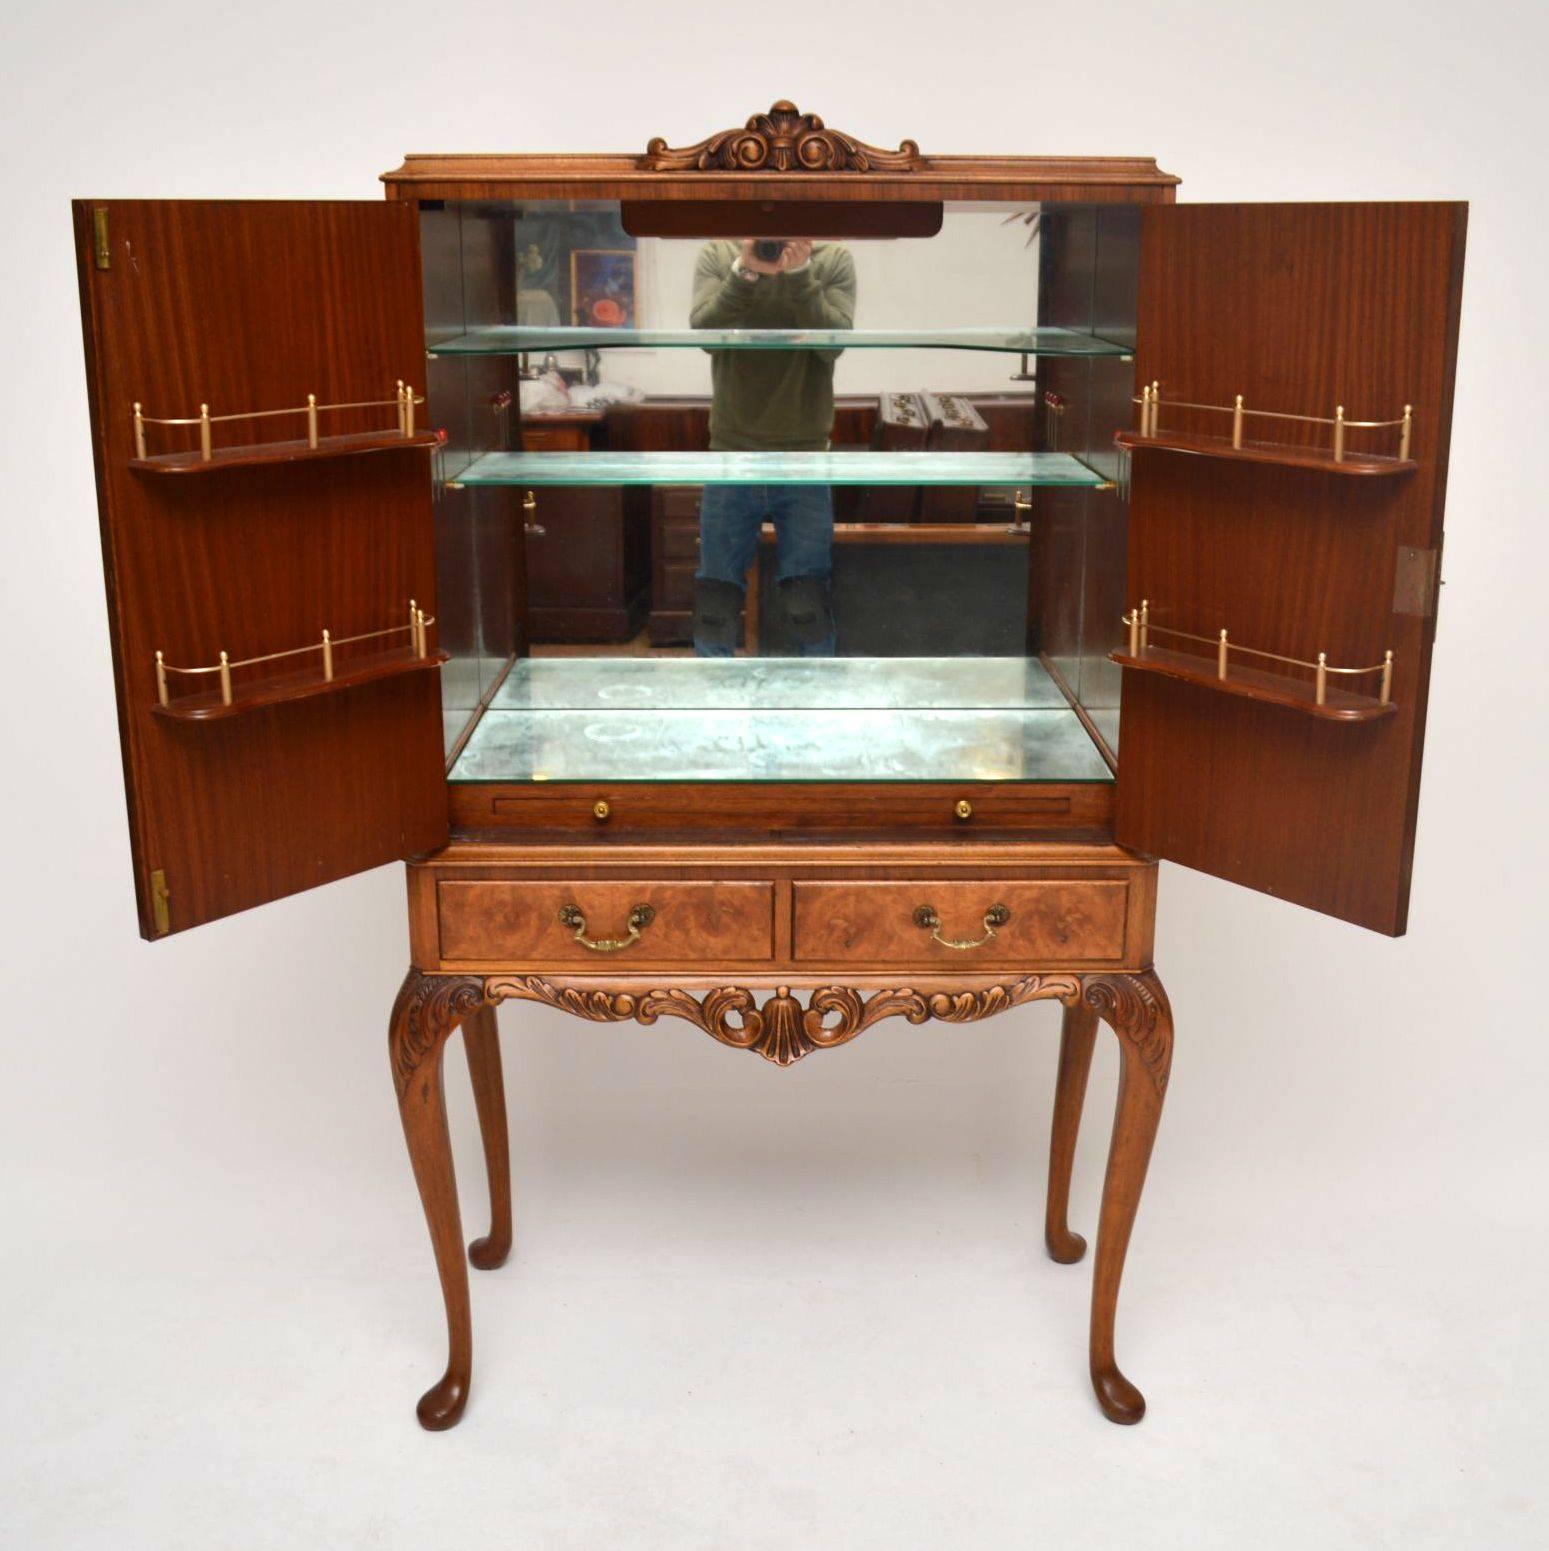 Antique walnut cocktail cabinet in excellent condition and dating from around the 1930s period. It's beautifully carved on the top, plus between and on the shaped legs. The two doors are burr walnut, with crossbanding and the drawers are burr walnut